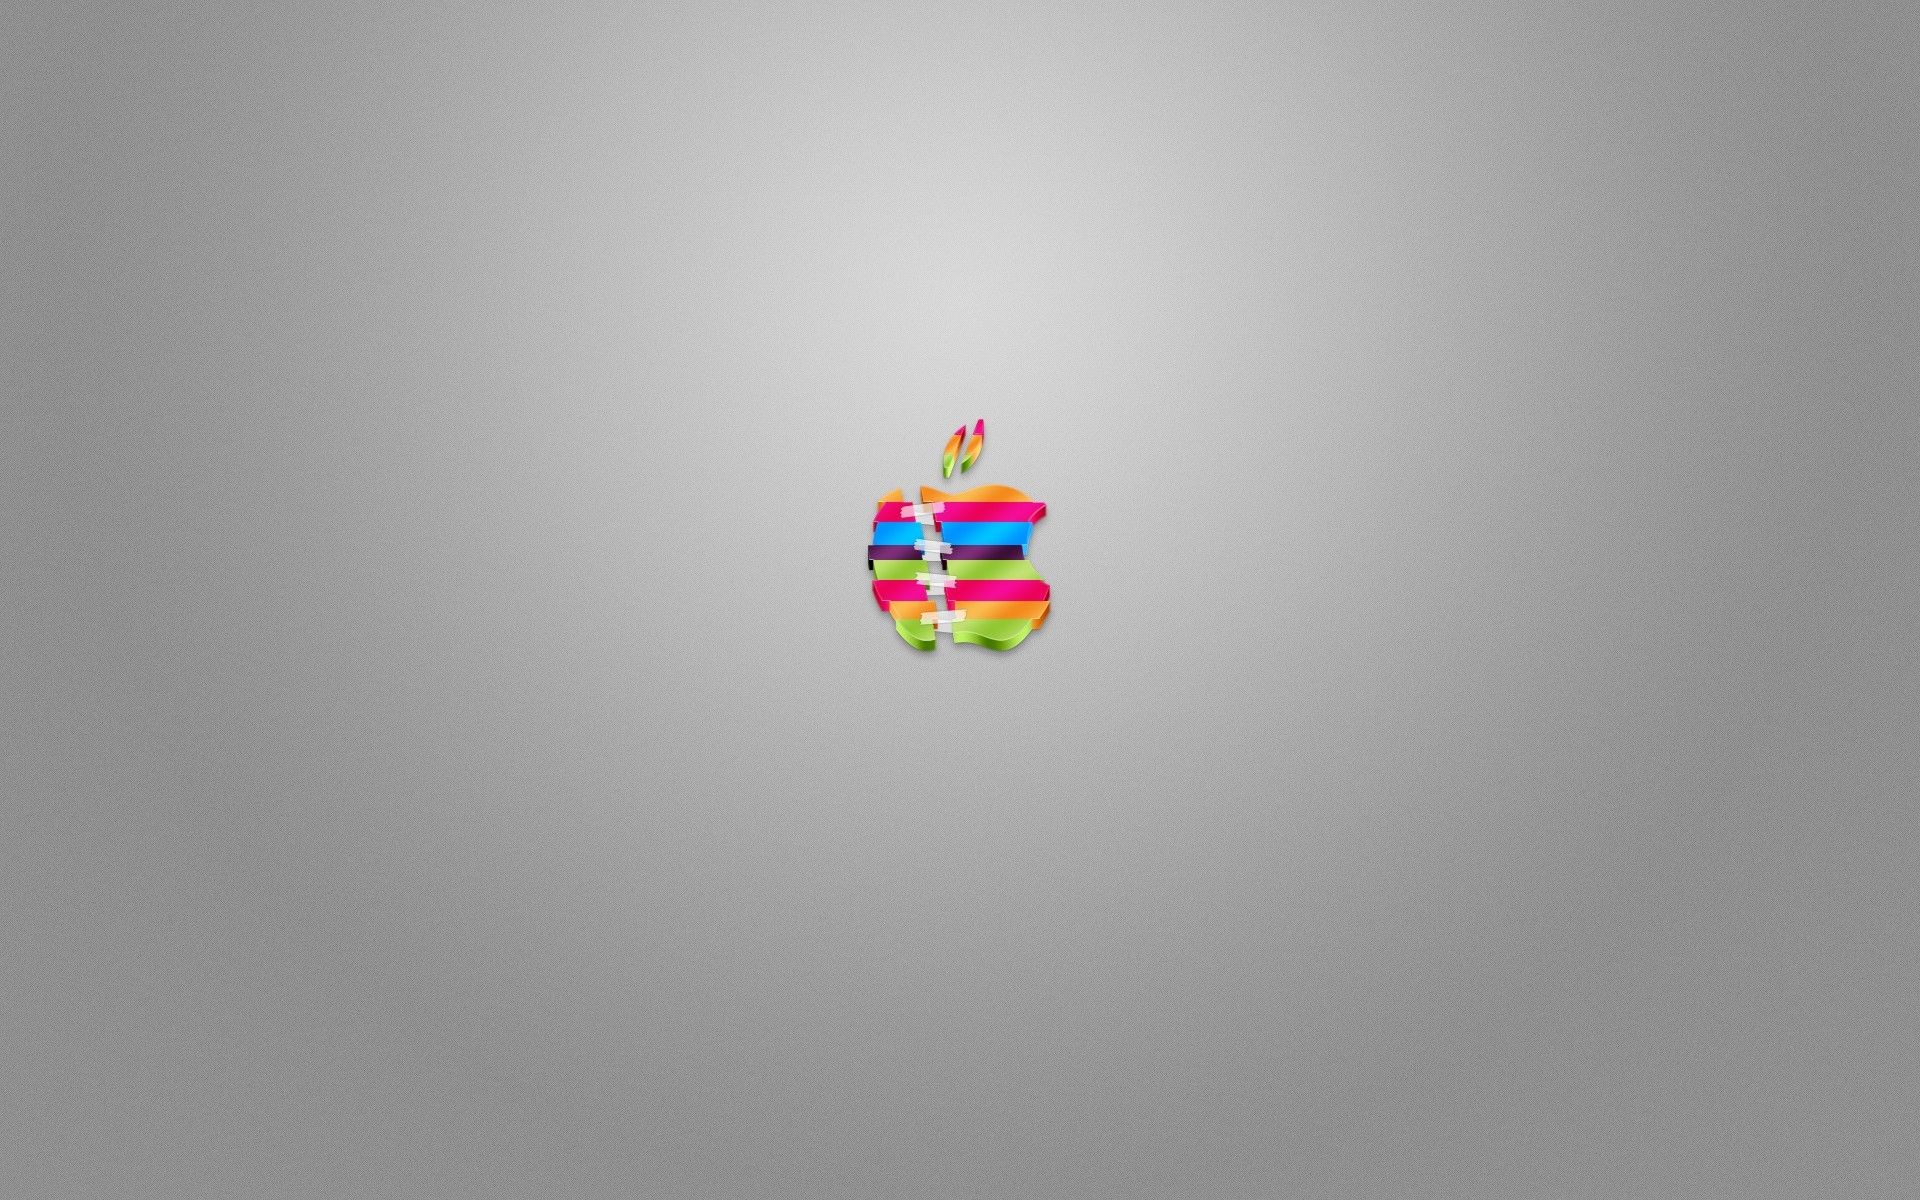 1920x1200 Colorful Apple Check more at http://hdwallpaperfx.com/colorful-apple/